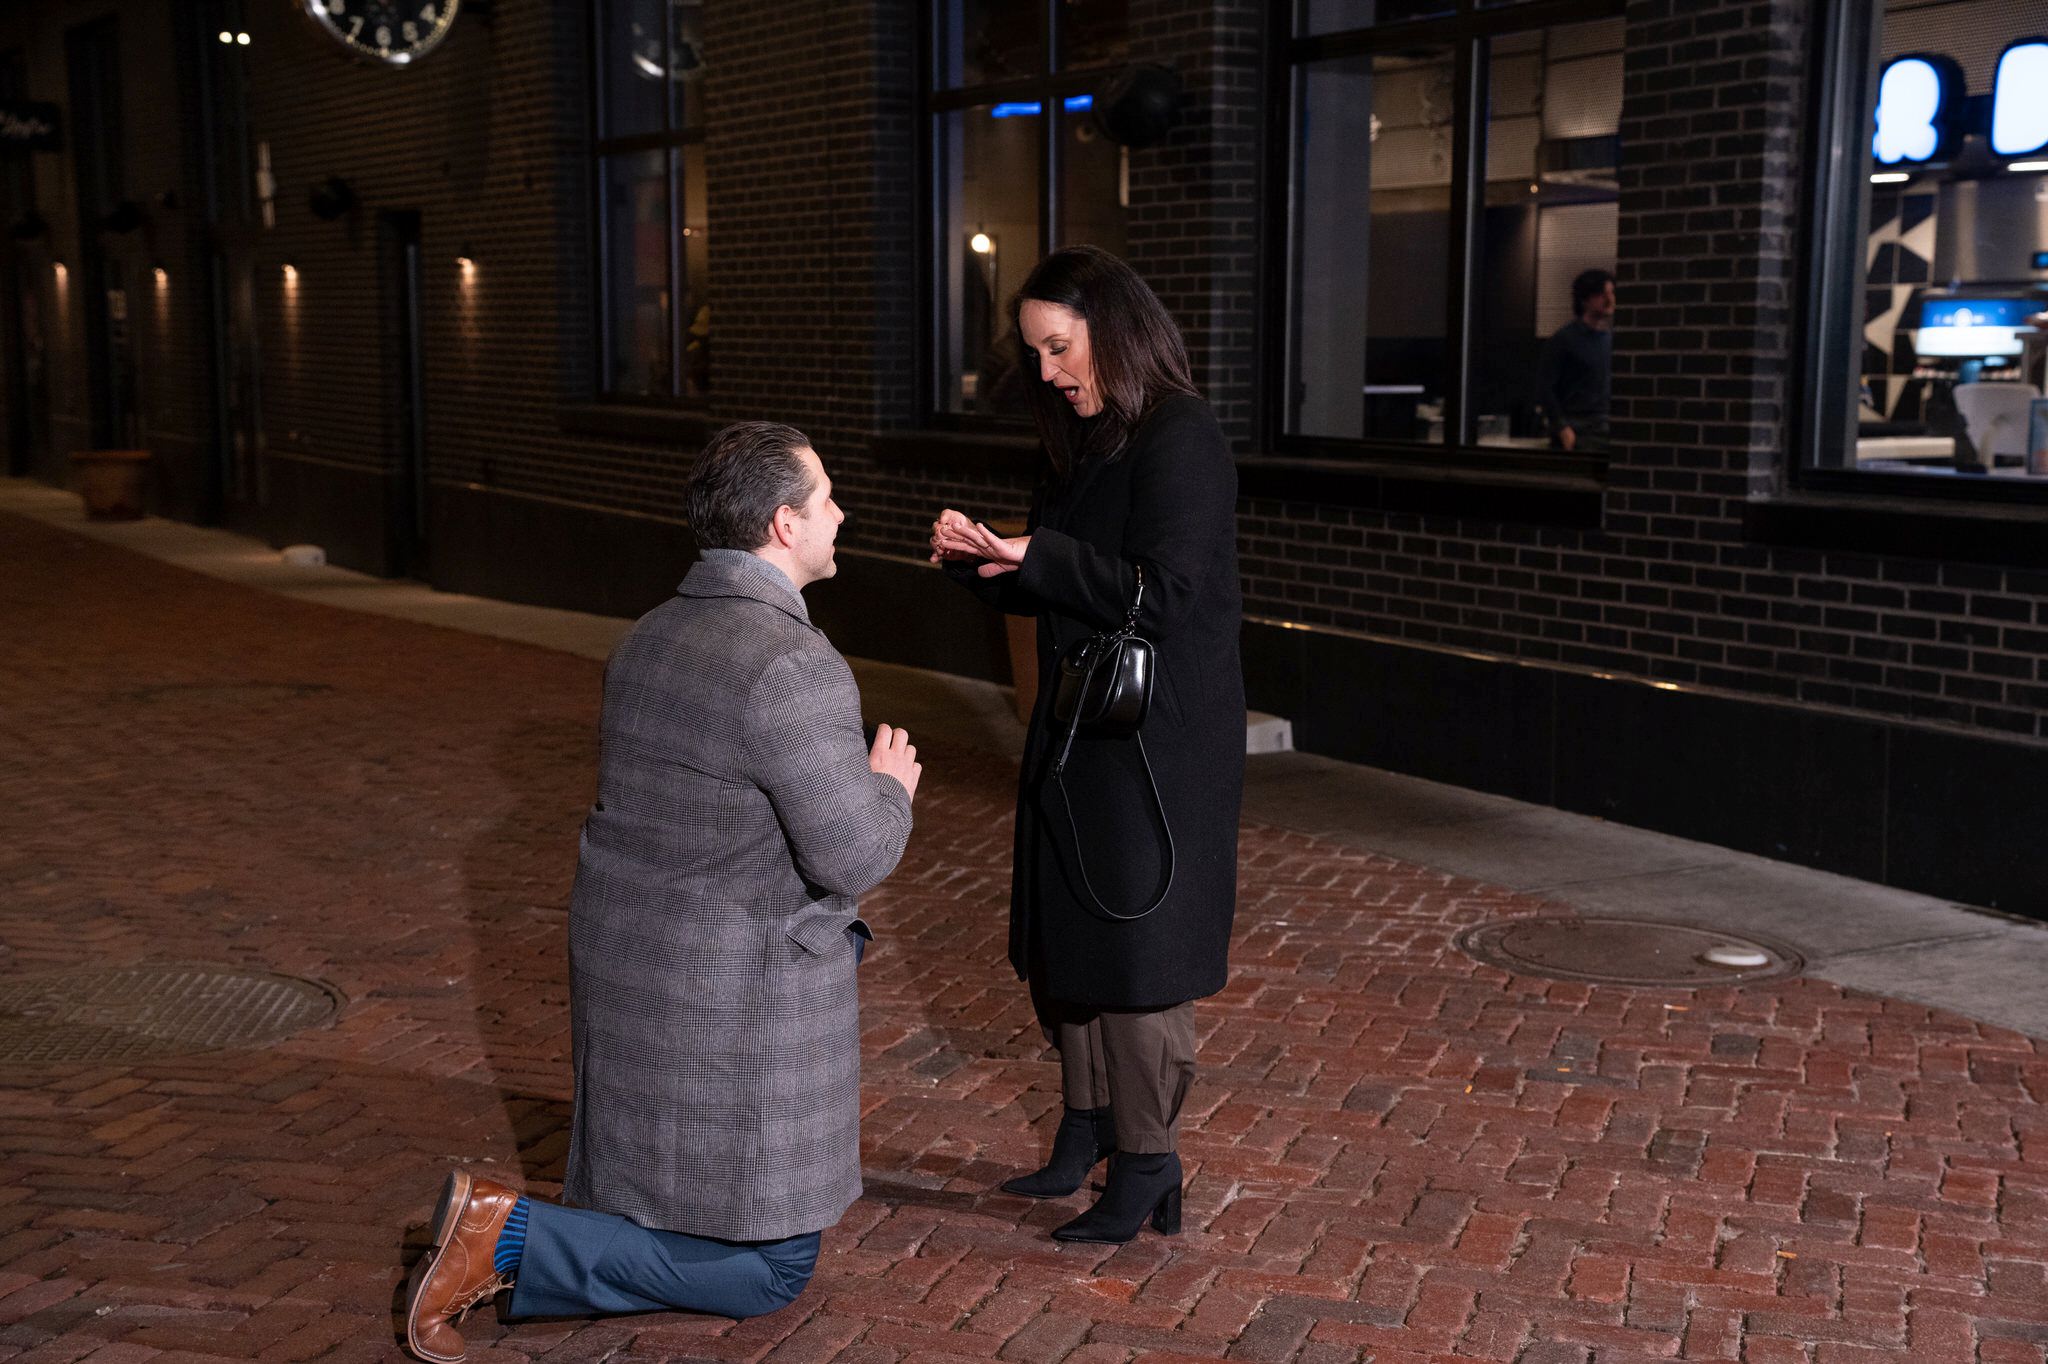 A fiance looks at her hand after saying "yes" to a marriage proposal in Parker's Alley in Detroit, MI. 